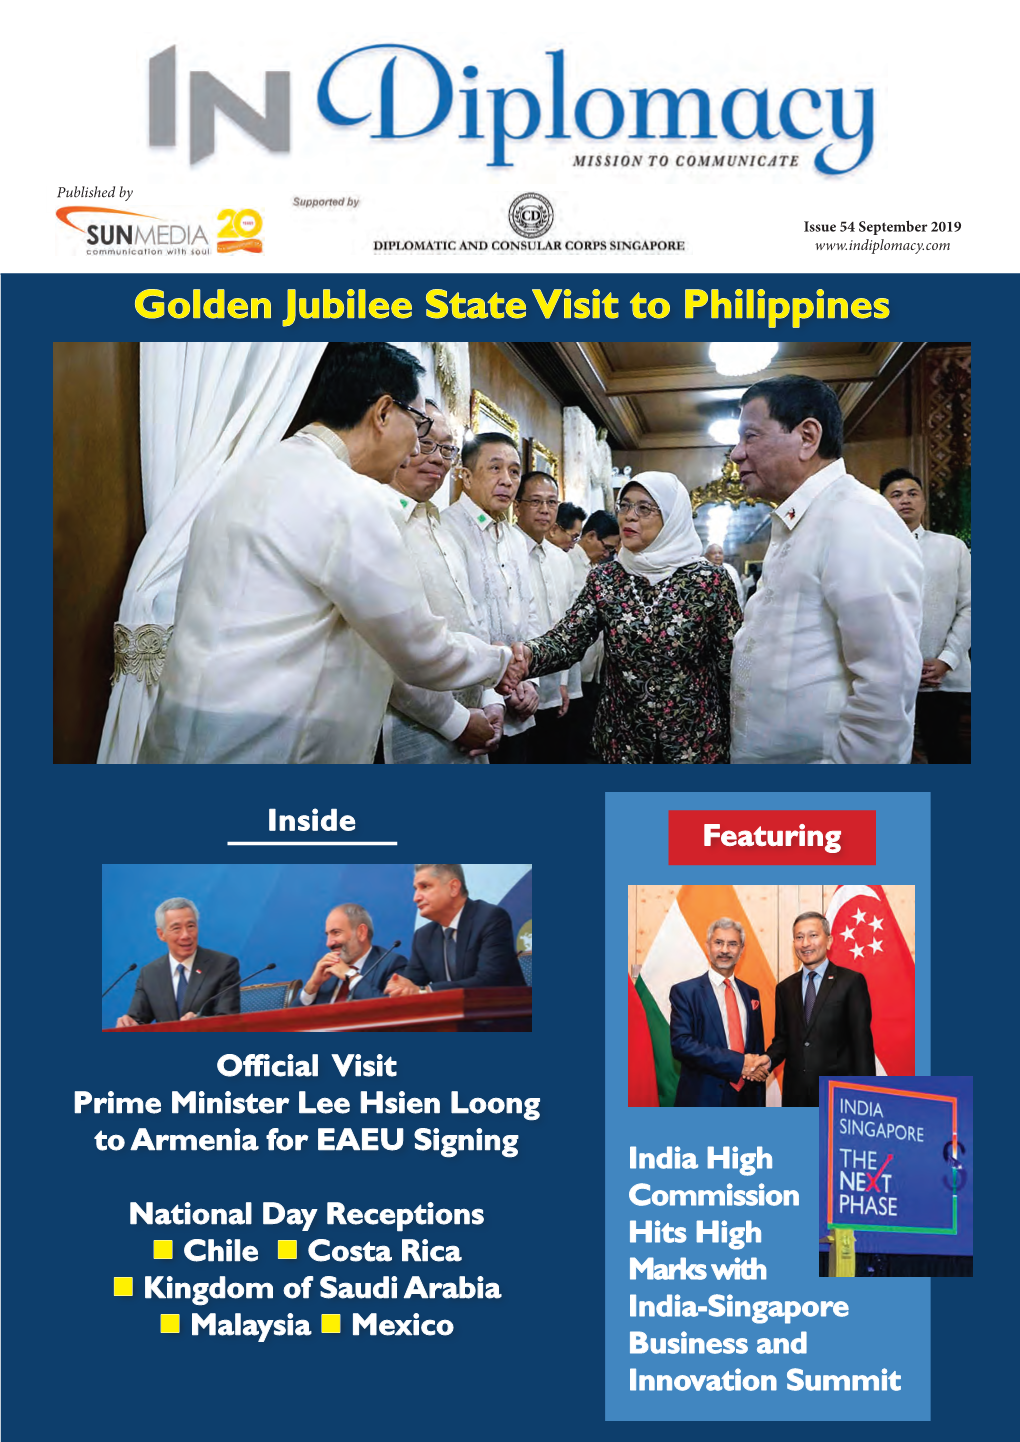 Golden Jubilee State Visit to Philippines